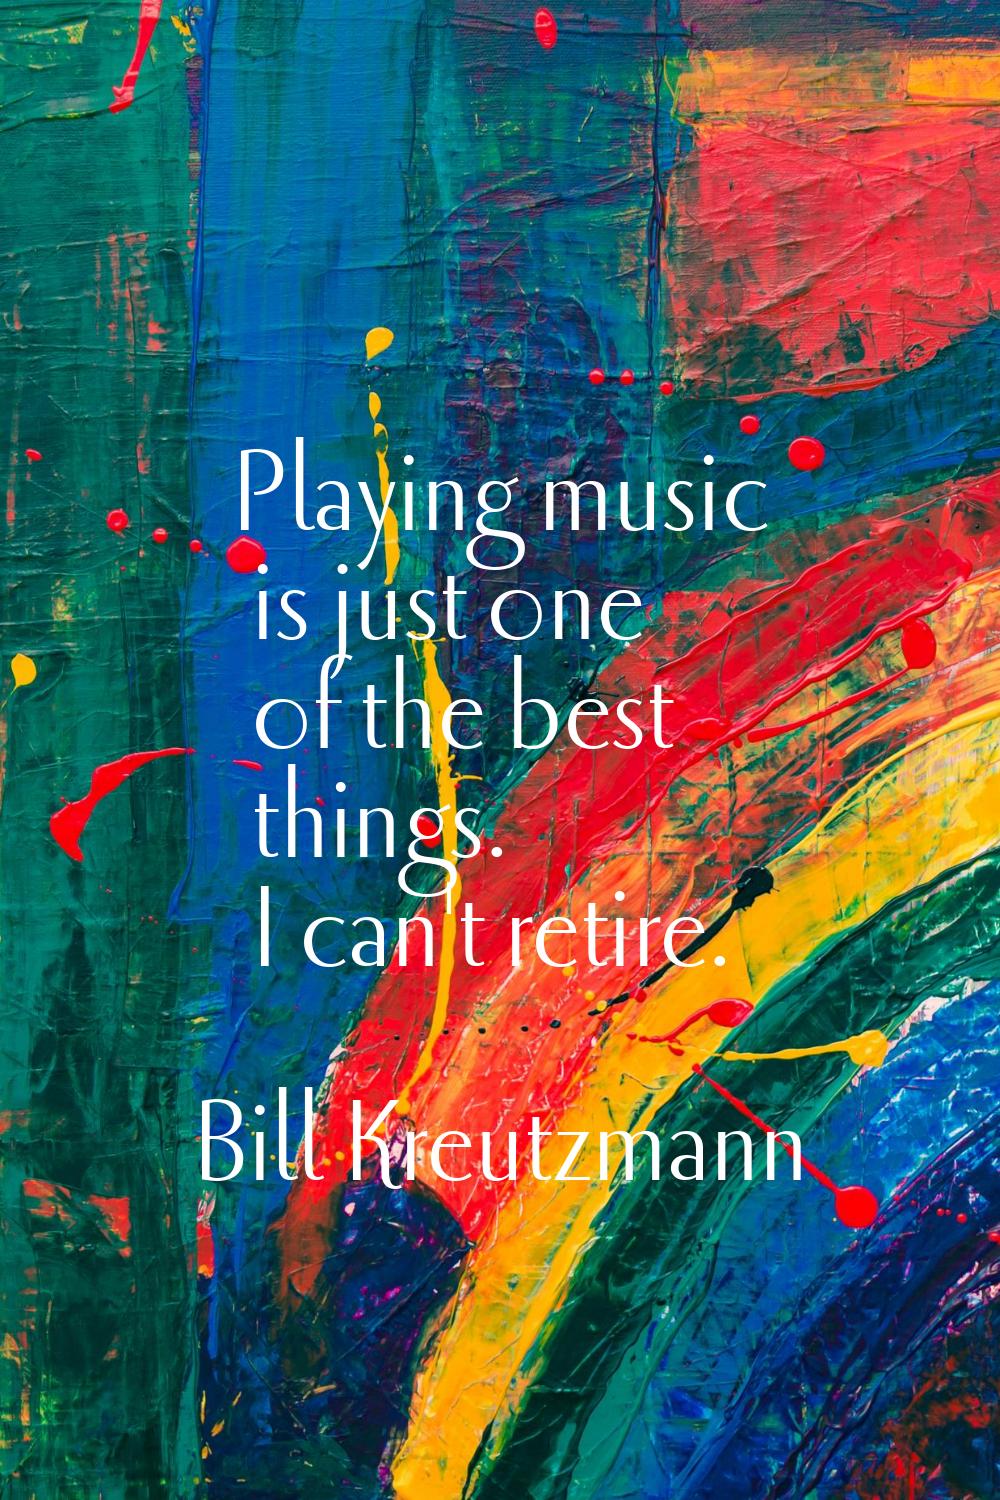 Playing music is just one of the best things. I can't retire.